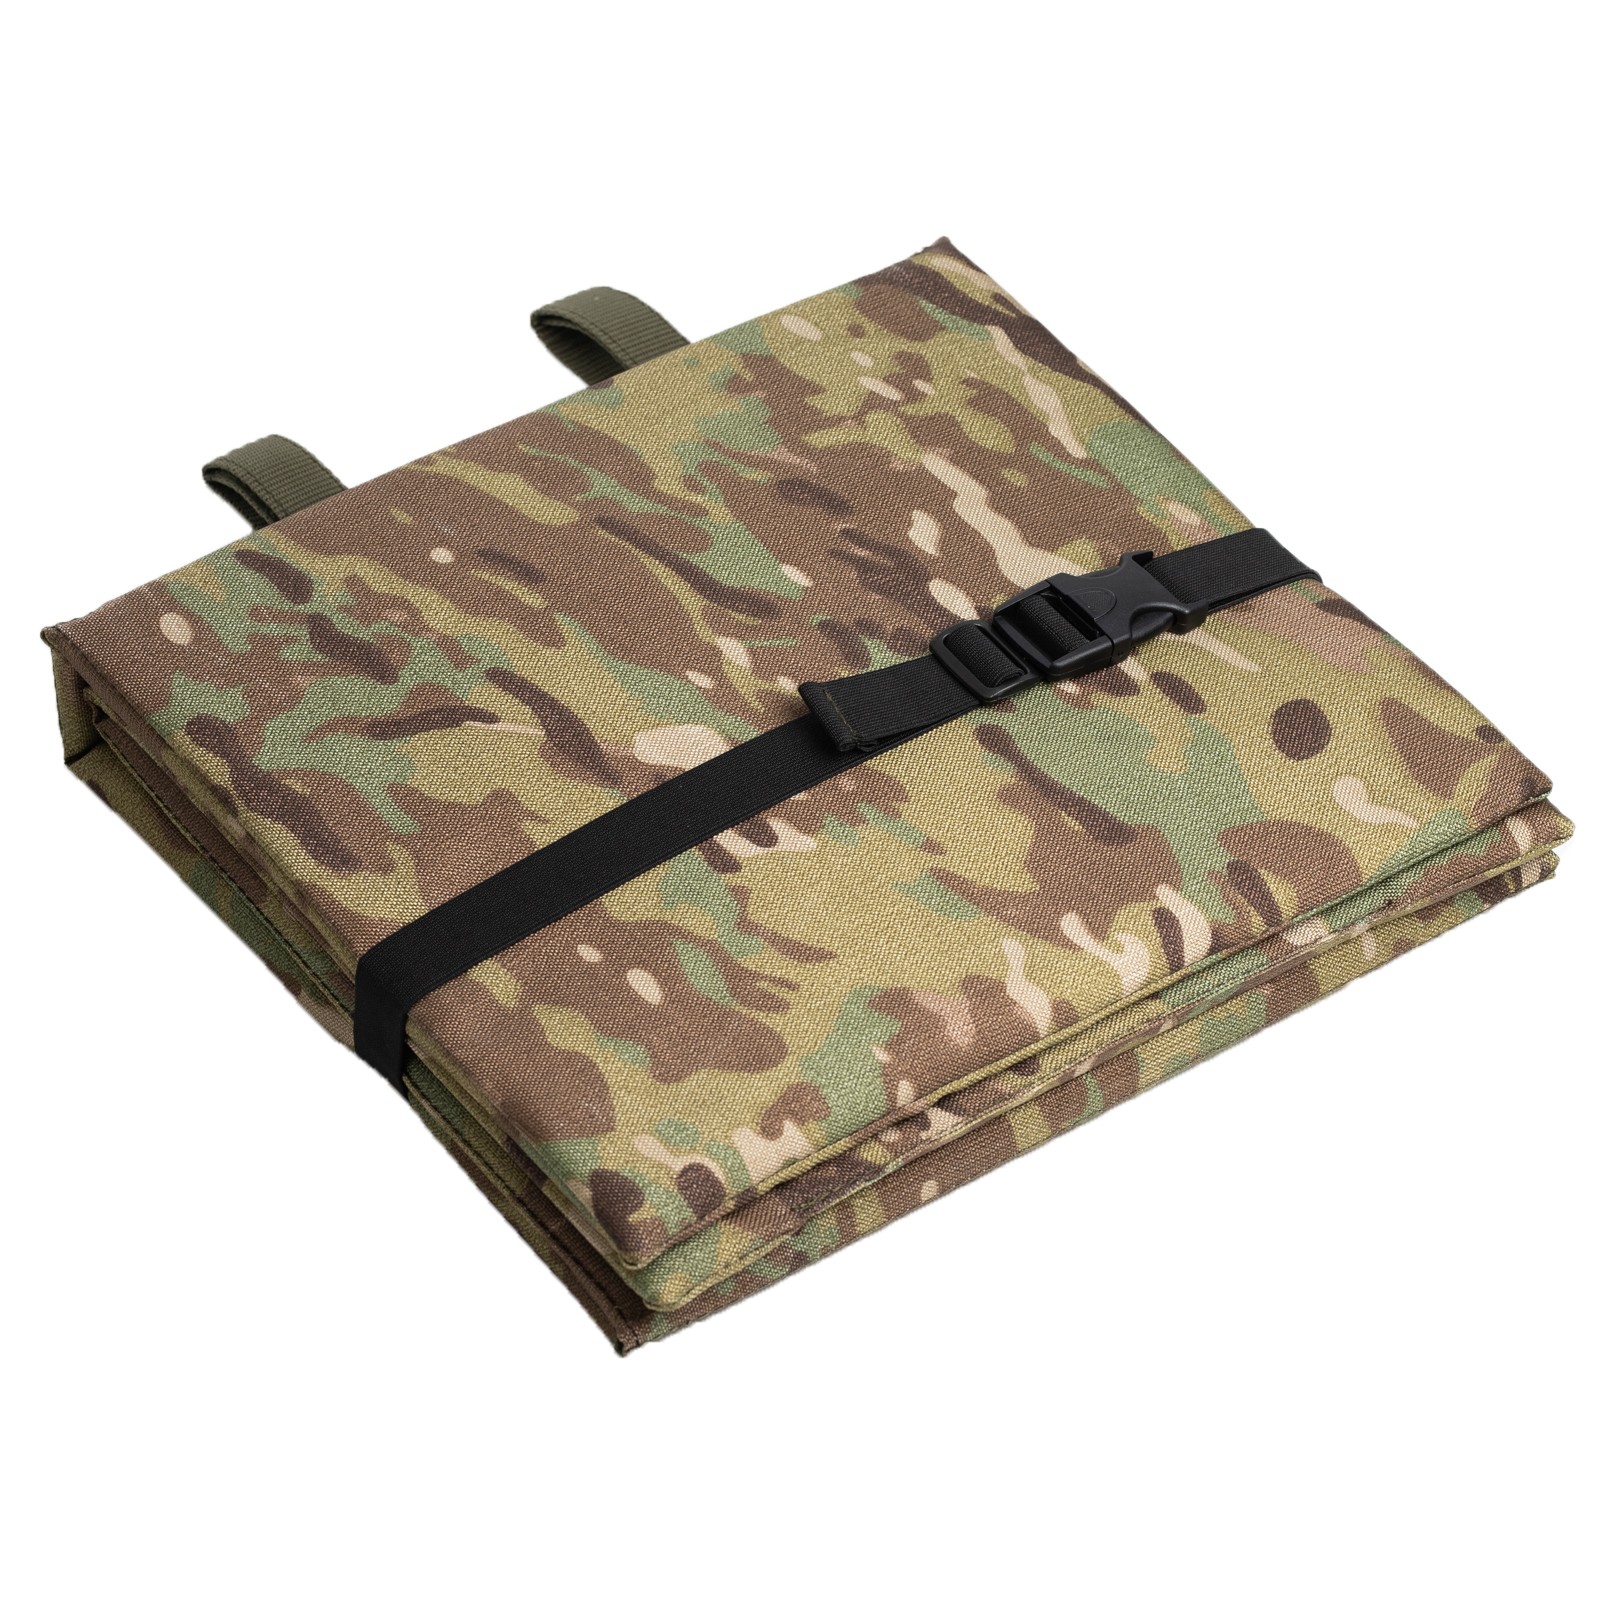 Seating pad multicam, groundsheet molle system, 10mm seat pad